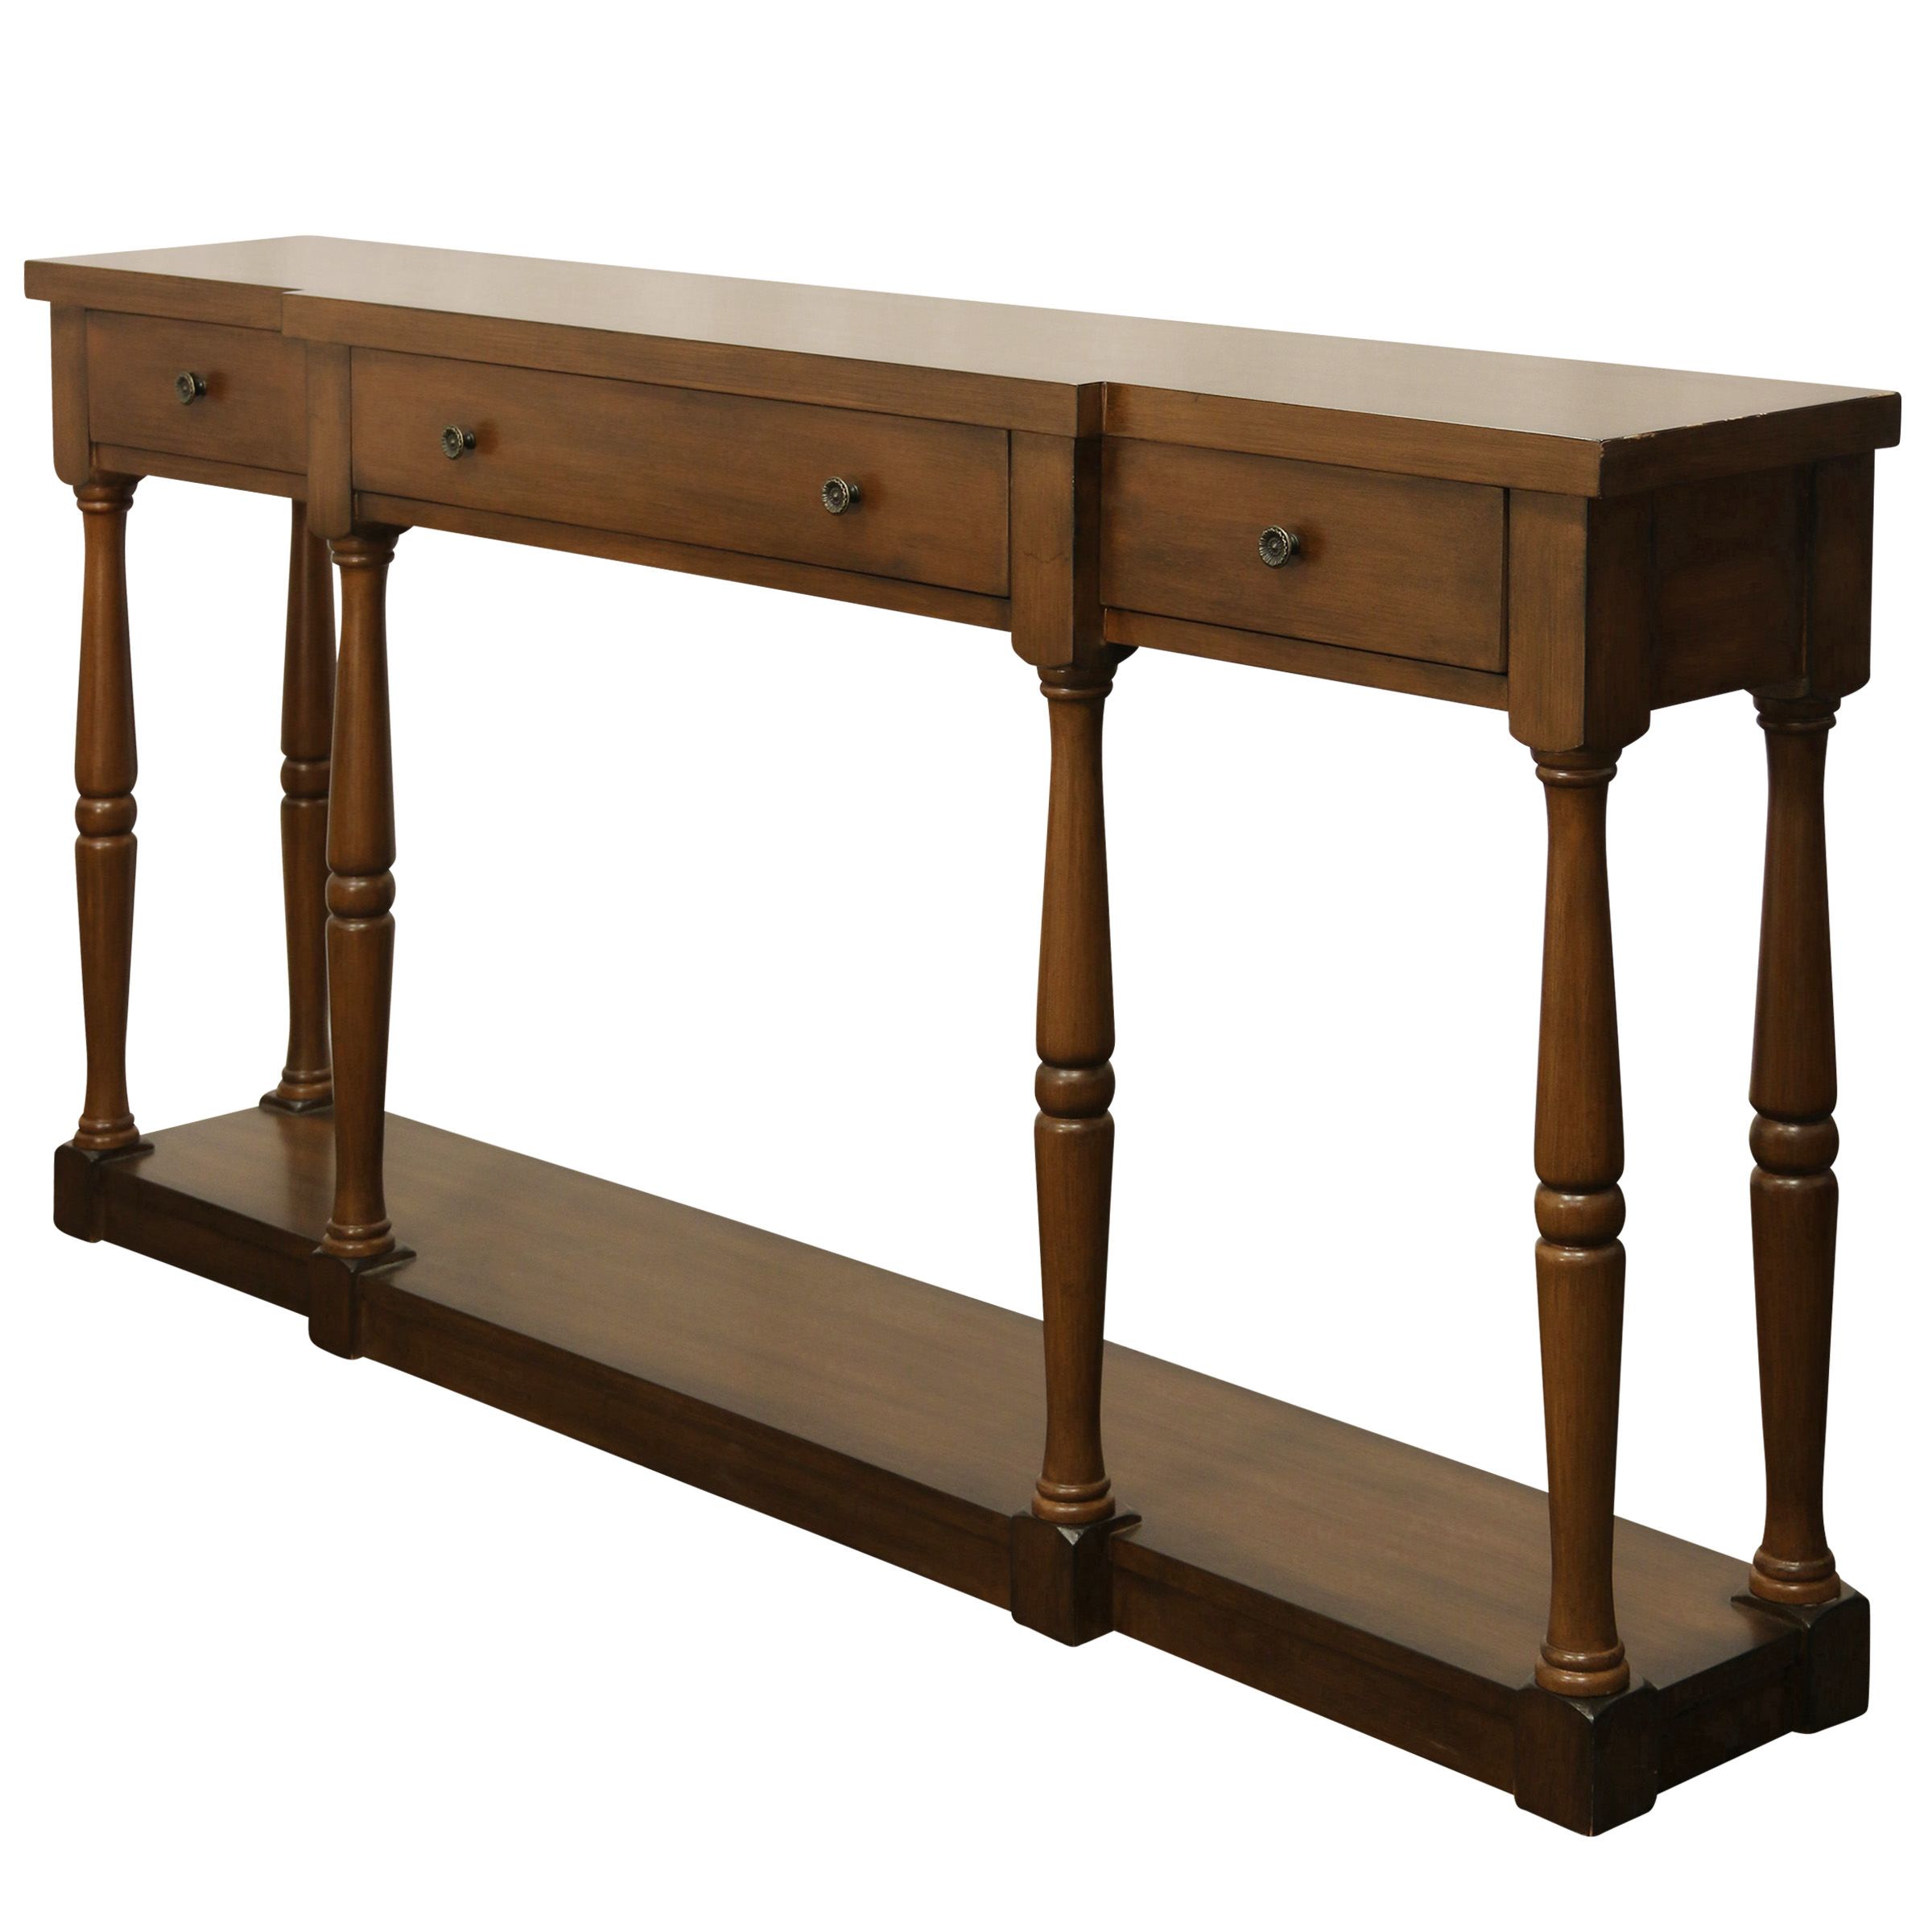 Most Recent Heartwood Cherry Wood Console Tables With Springfield 3 Drawer Wood Console Table – Cherry Finish (View 3 of 10)